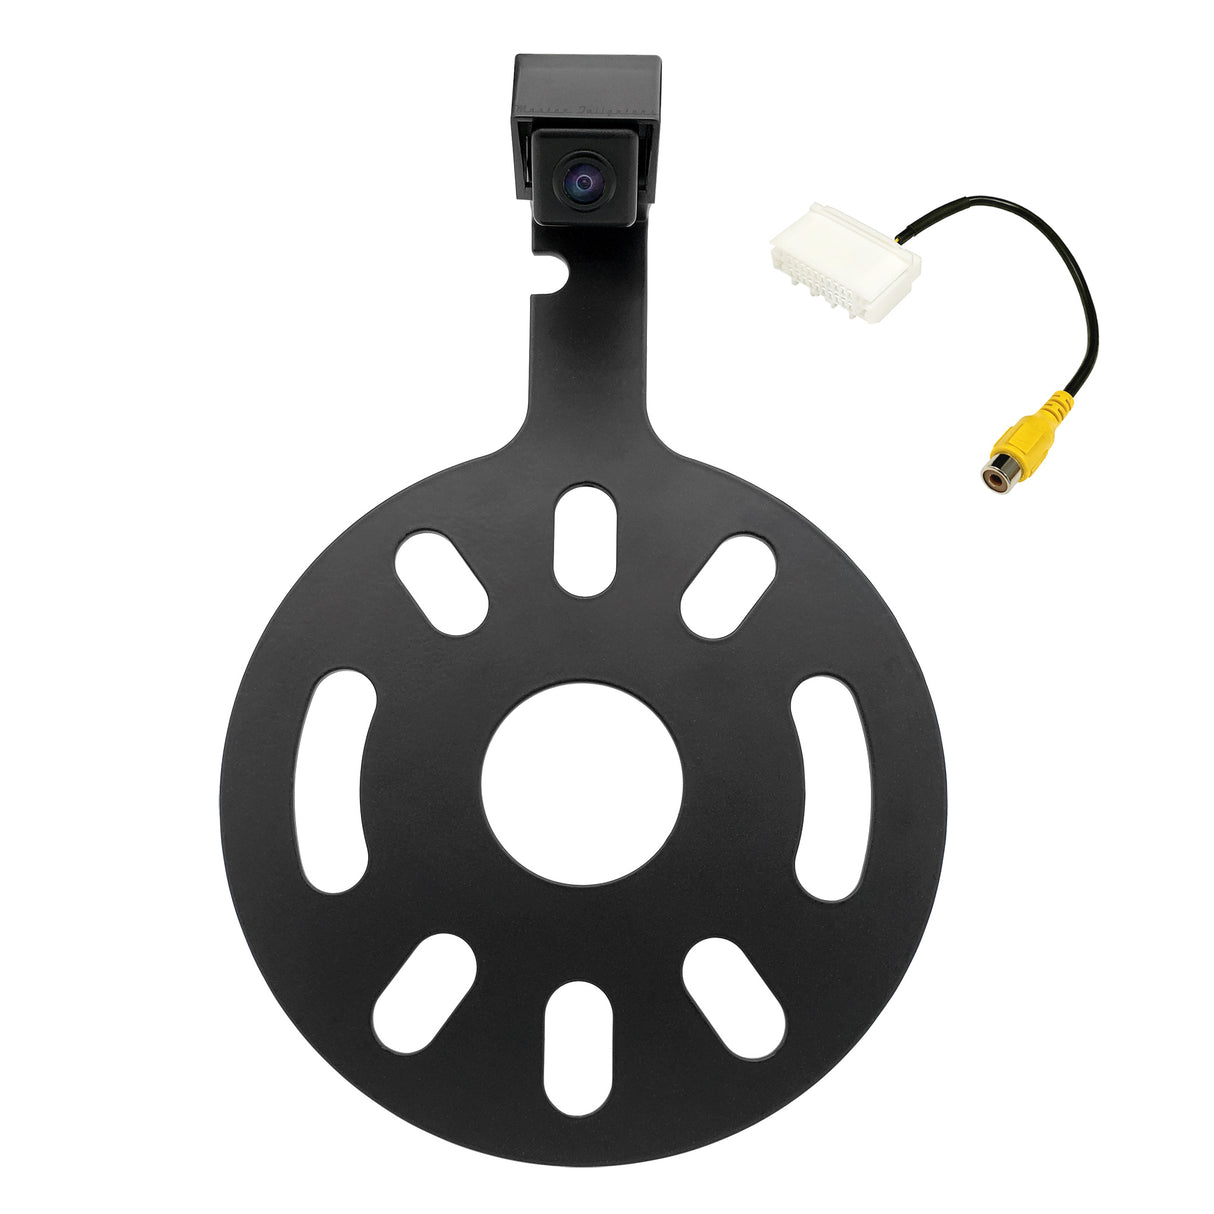 Jeep Wrangler Spare Tire Mount with Backup Camera